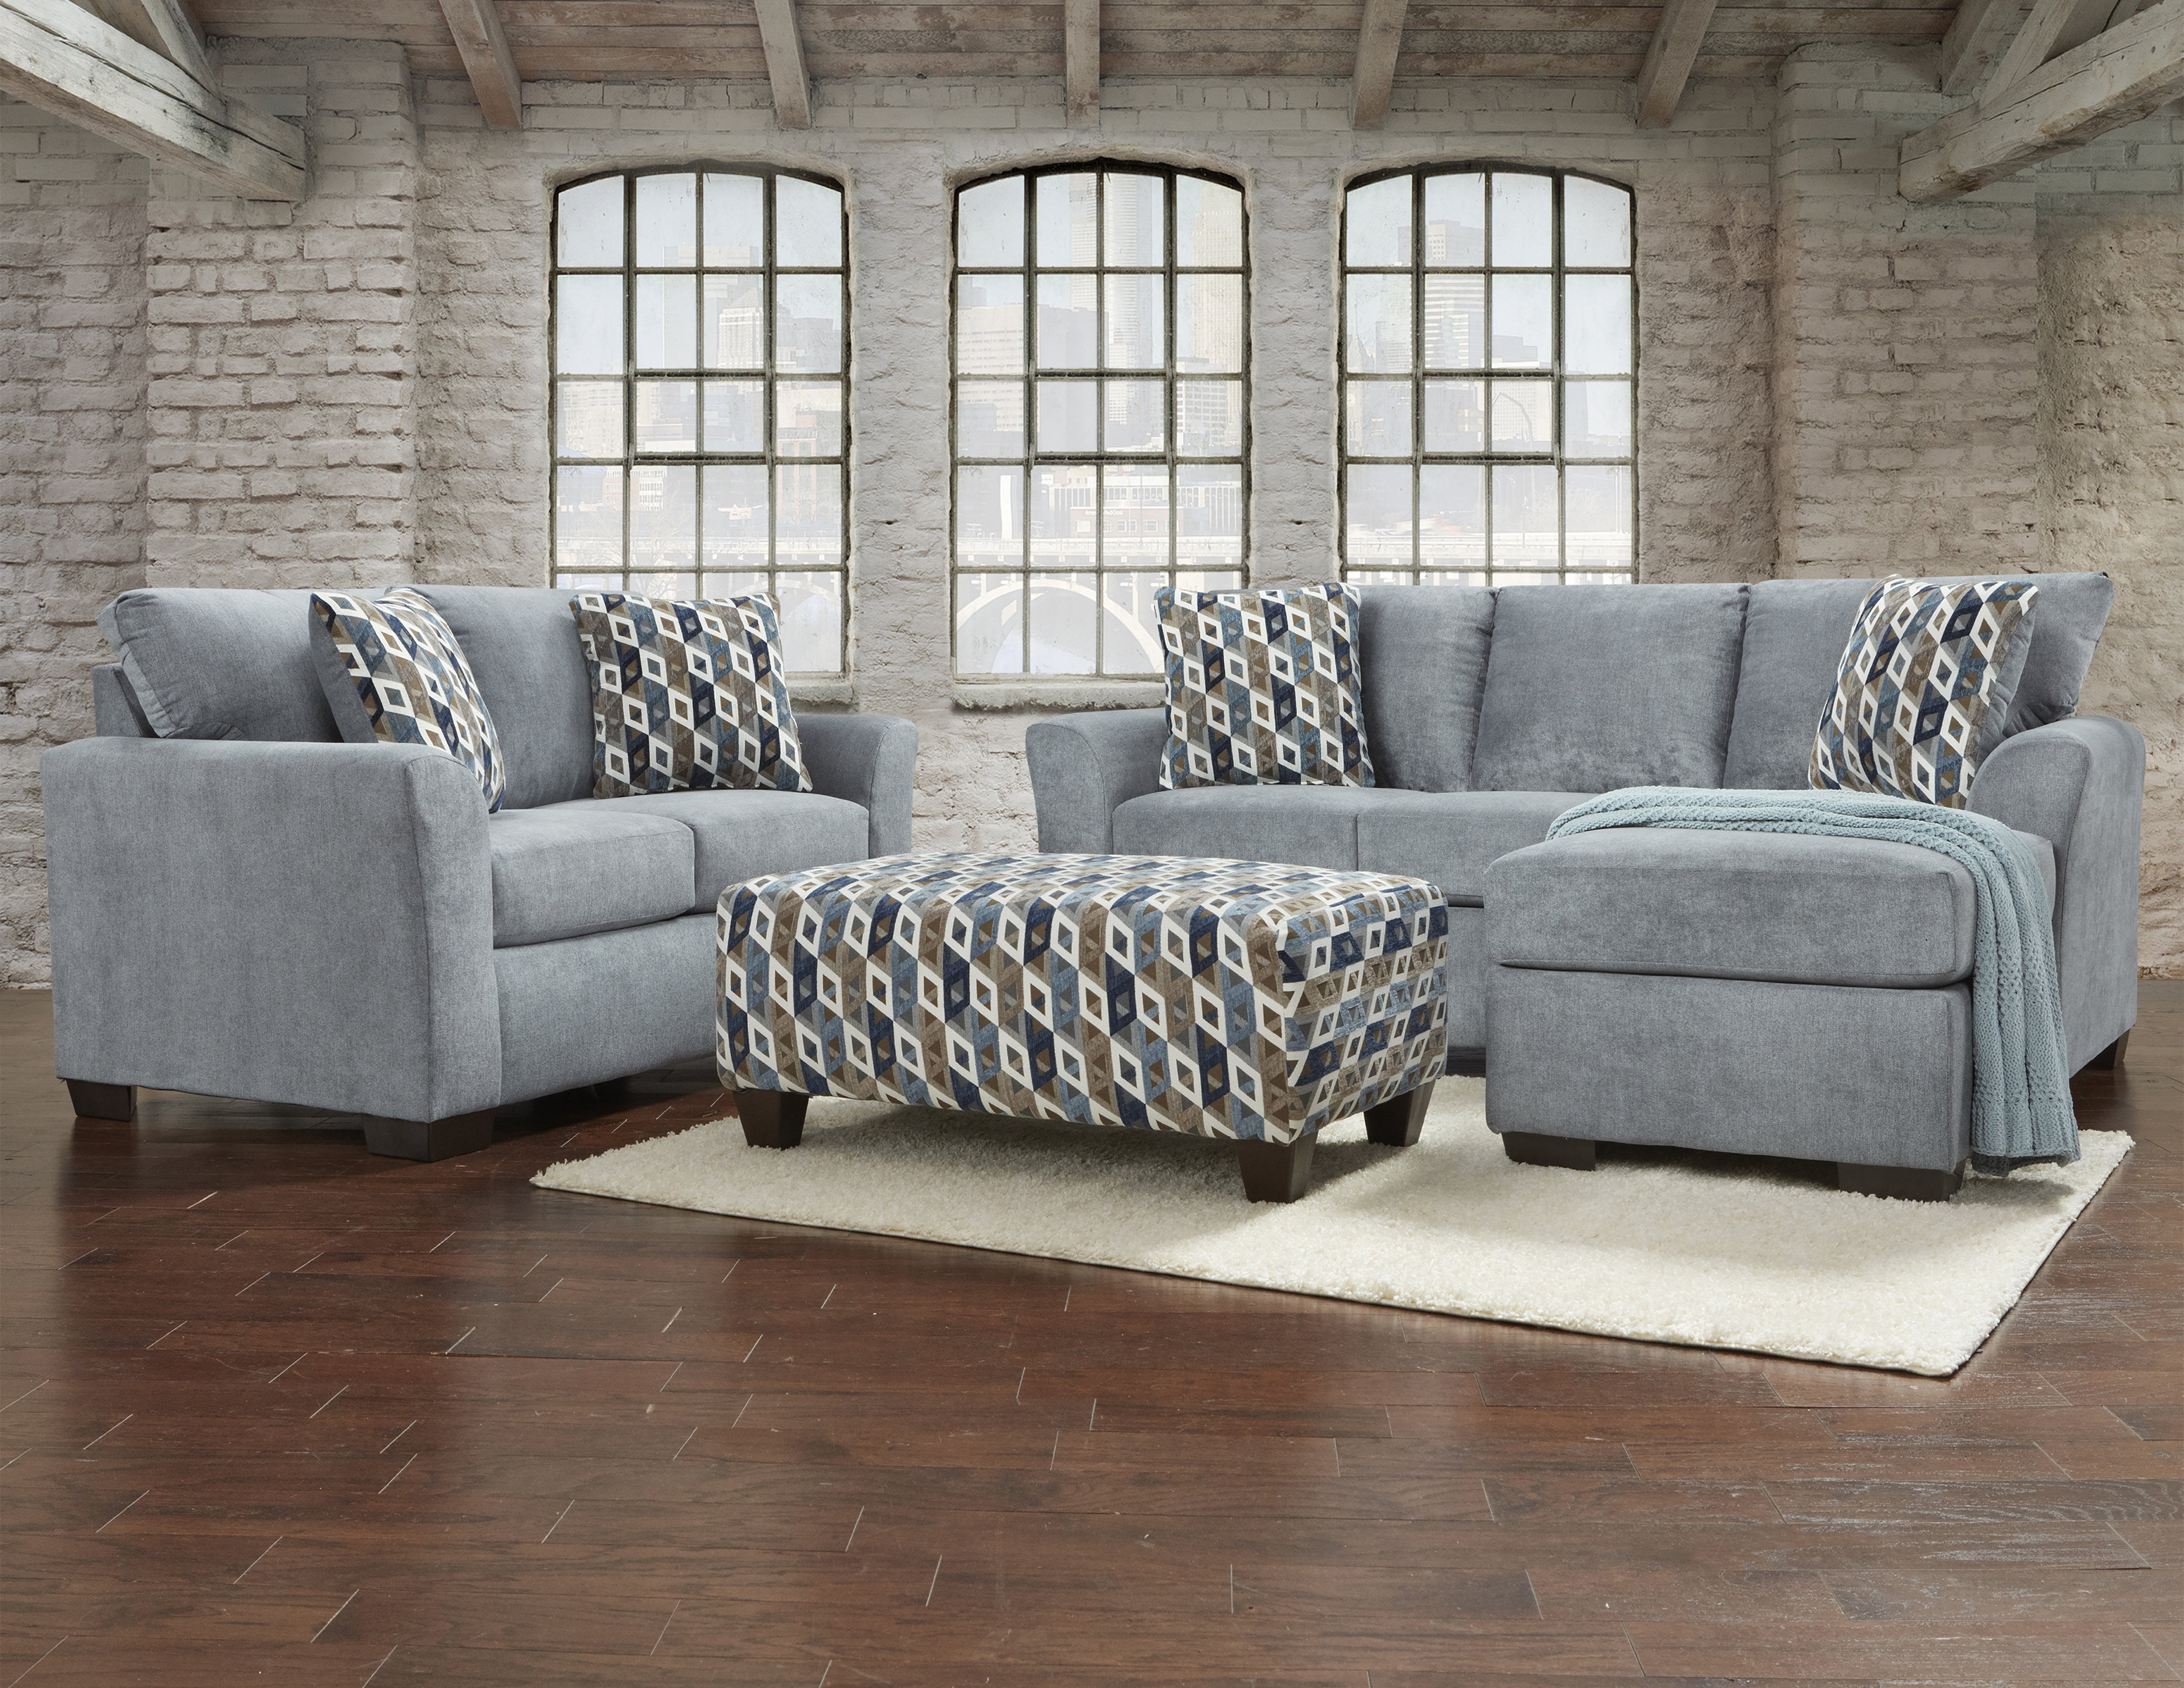 Living Room Sets Up To 50 Off Through 12 26 Wayfair